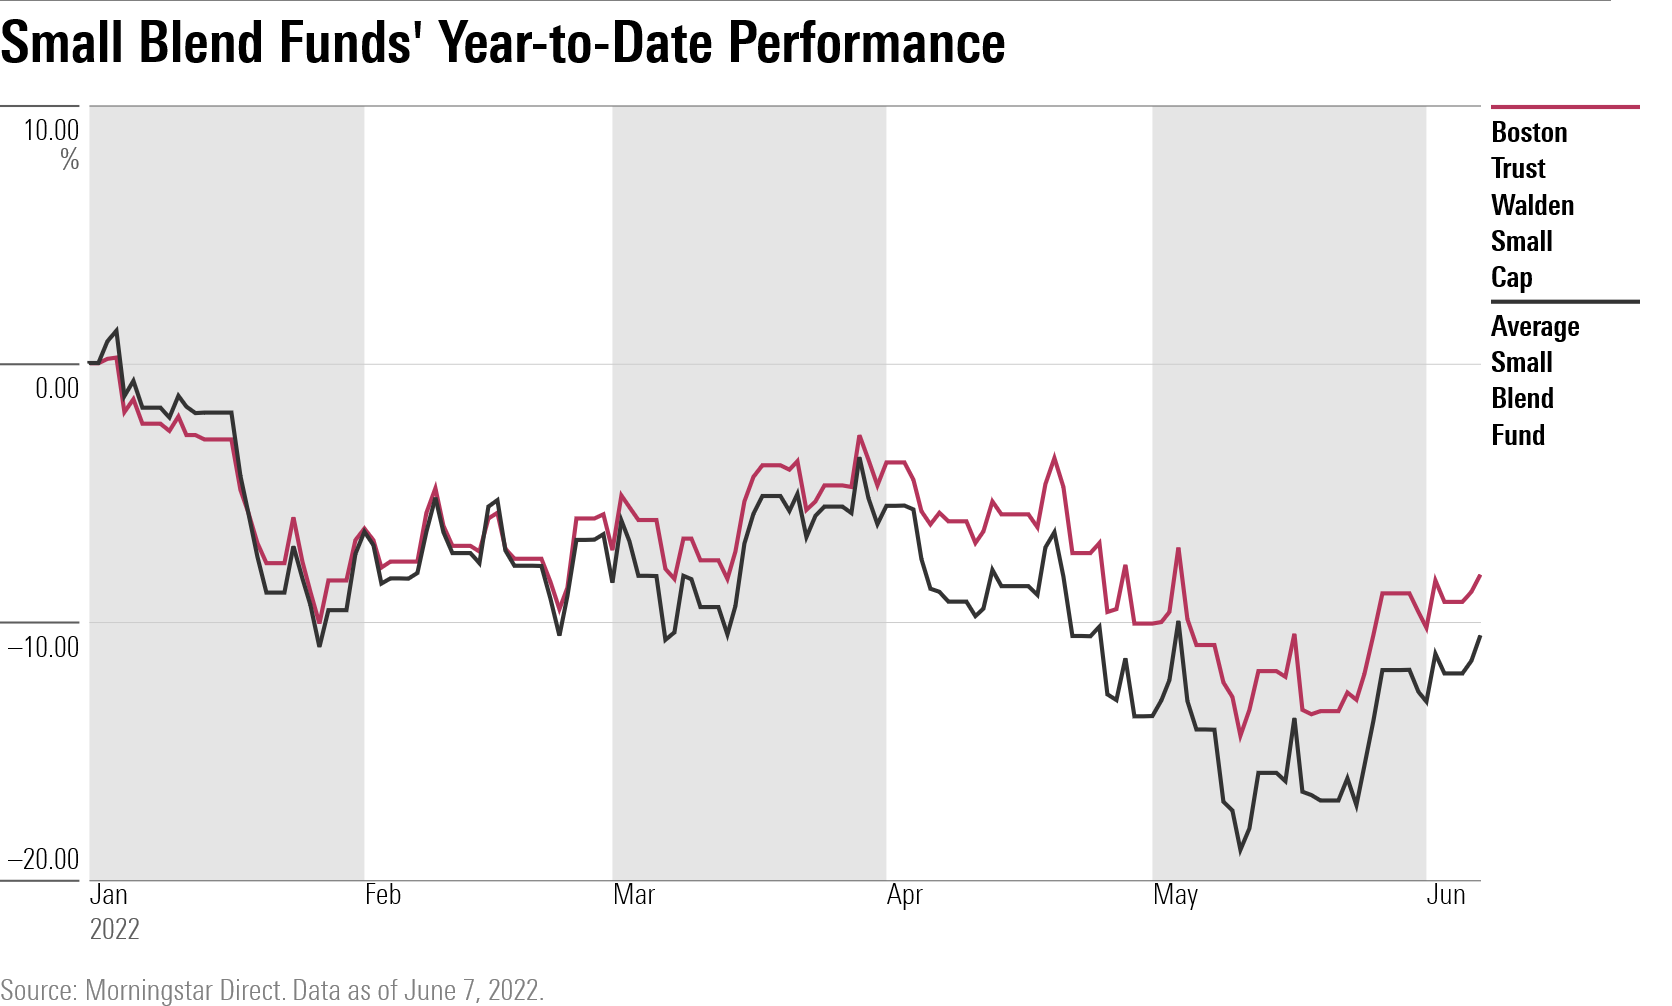 A line chart comparing the year-to-date performance of Boston Trust Walden Small Cap with the average small-blend fund.